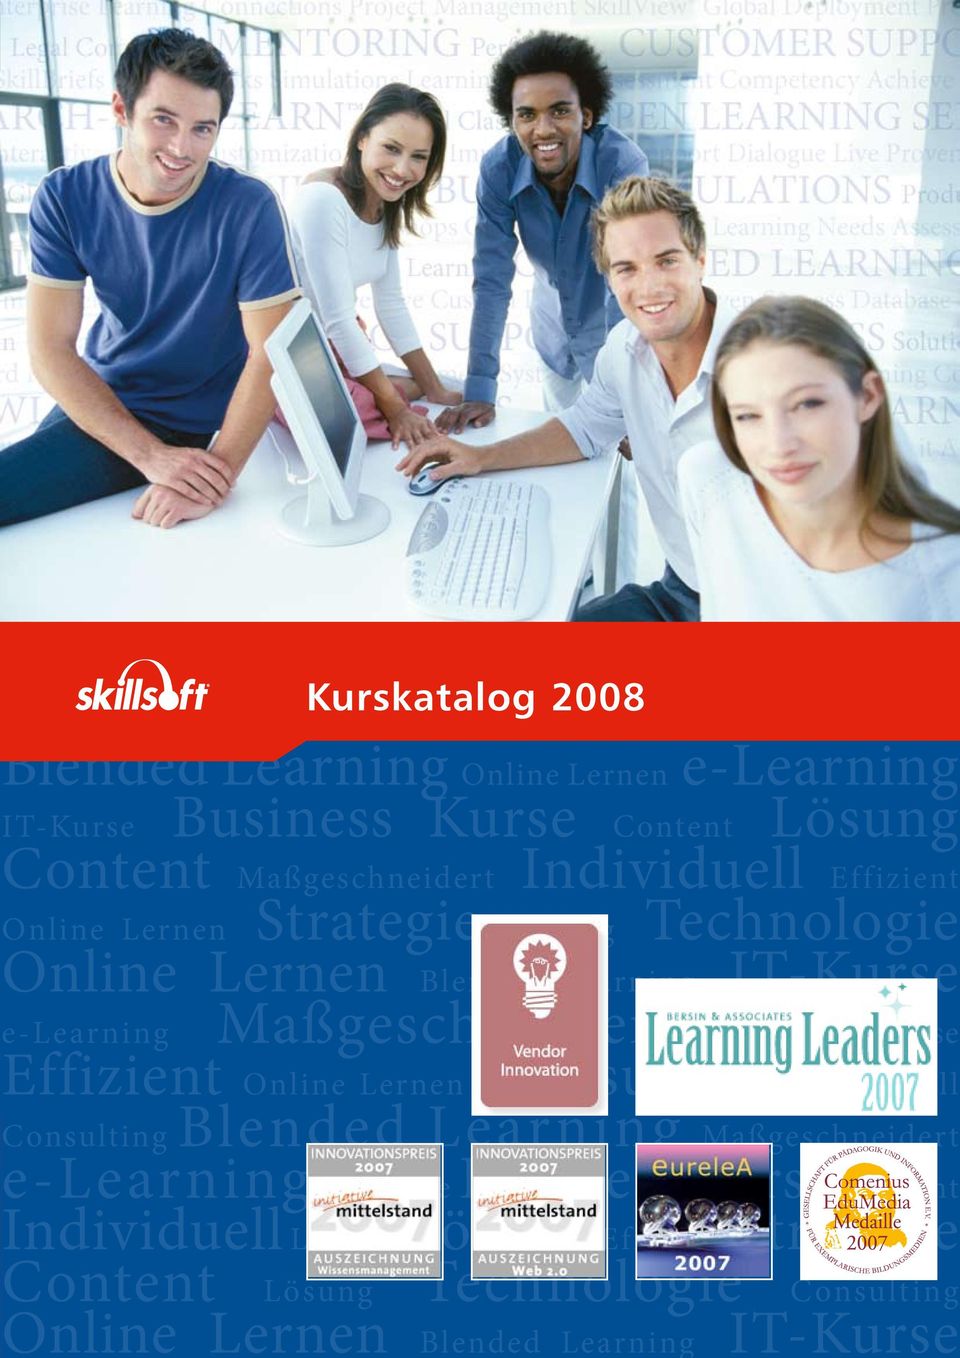 e-learning Business Kurse Effizient Consulting Online Lernen Individuell Blended Learning Consulting Maßgeschneidert e-learning